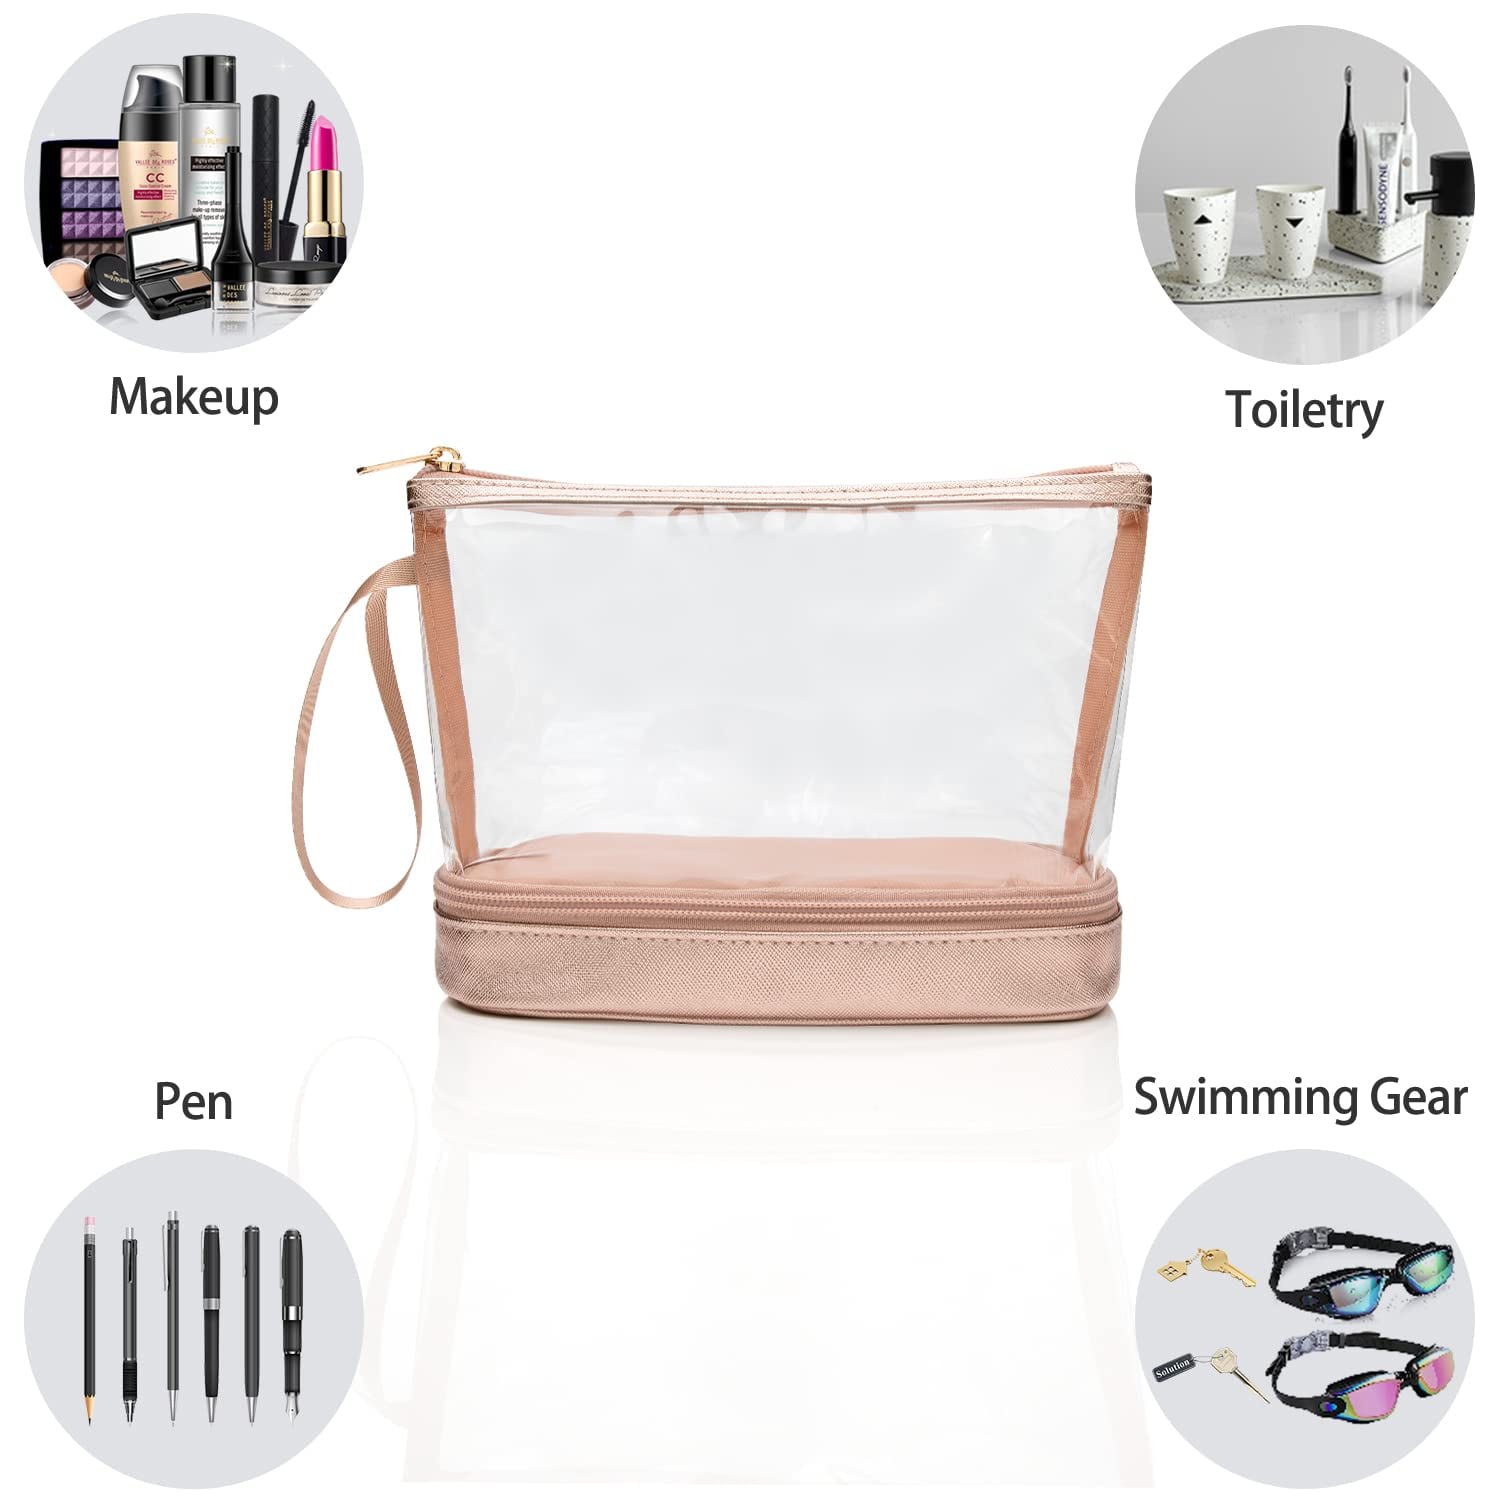  KOTORA Clear Makeup Bag Cosmetics Bag Mini Small Pouch Purse  TSA Approved Toiletry Bags Zipper Pink Cute Pouches Make Up Travel Toiletry  Car Accessories Essentials for women (Pink, Small) : Beauty